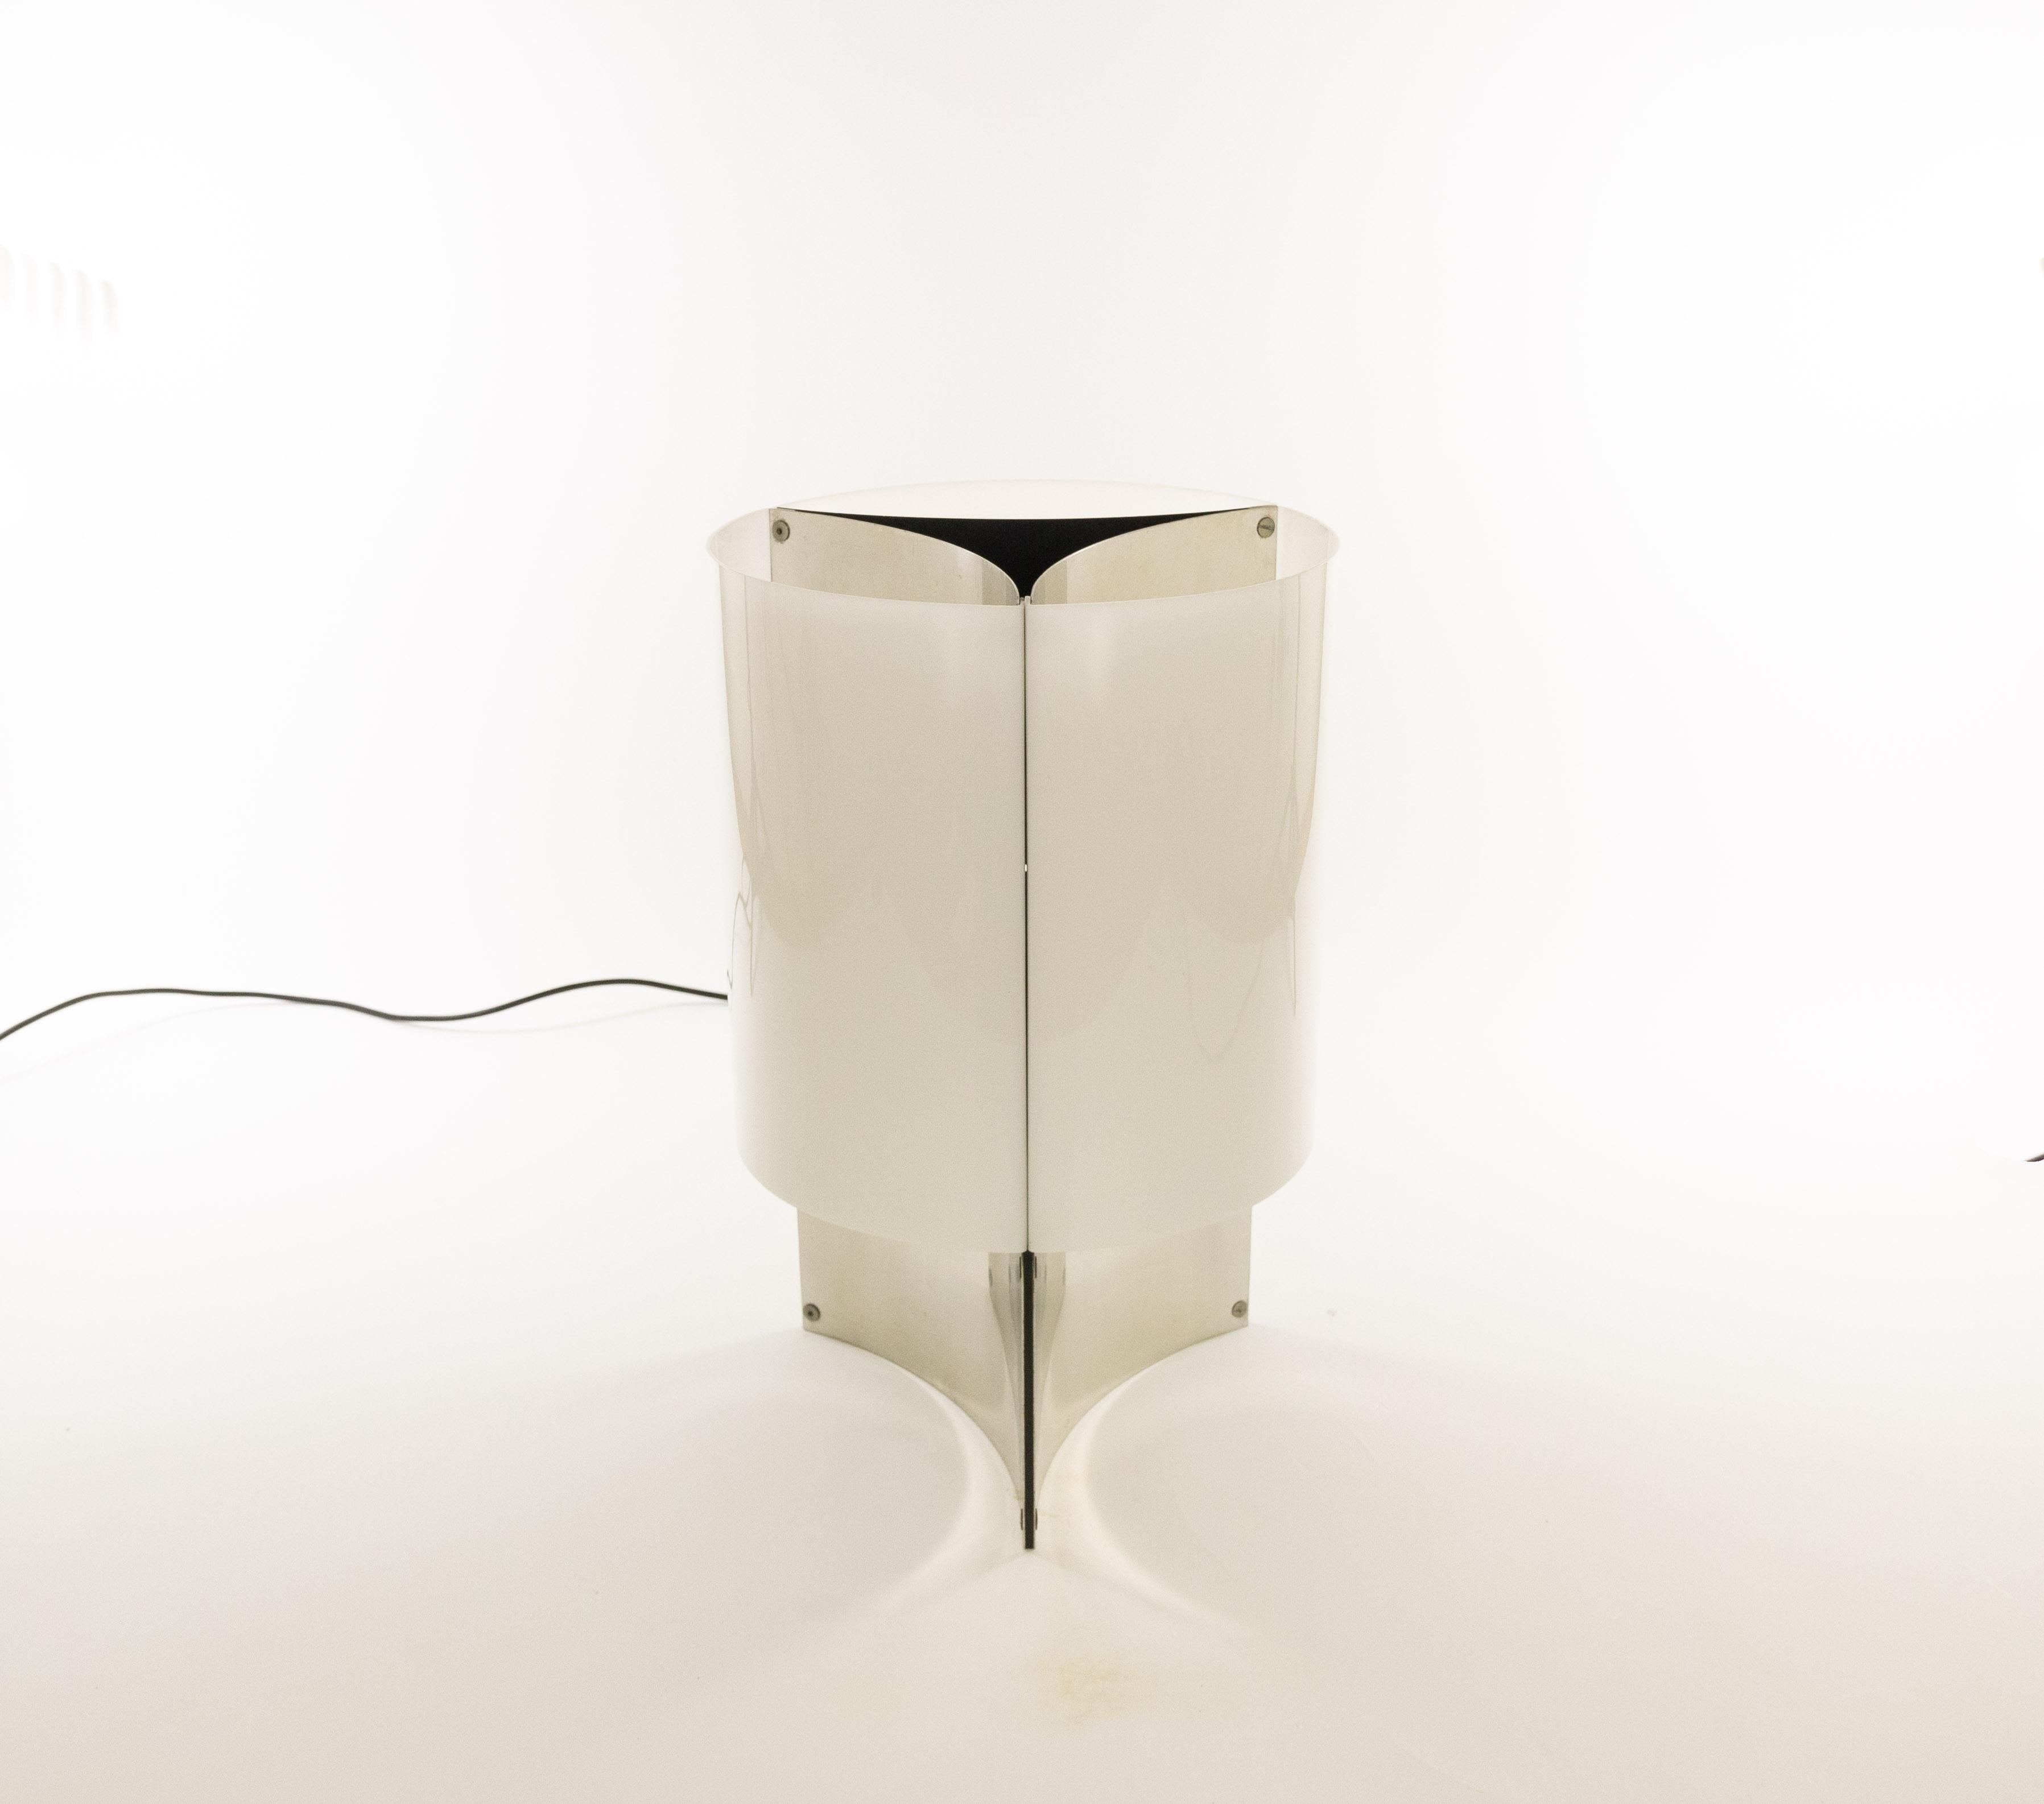 Metal Table Lamp Model No. 526/P by Massimo Vignelli for Arteluce, 1965